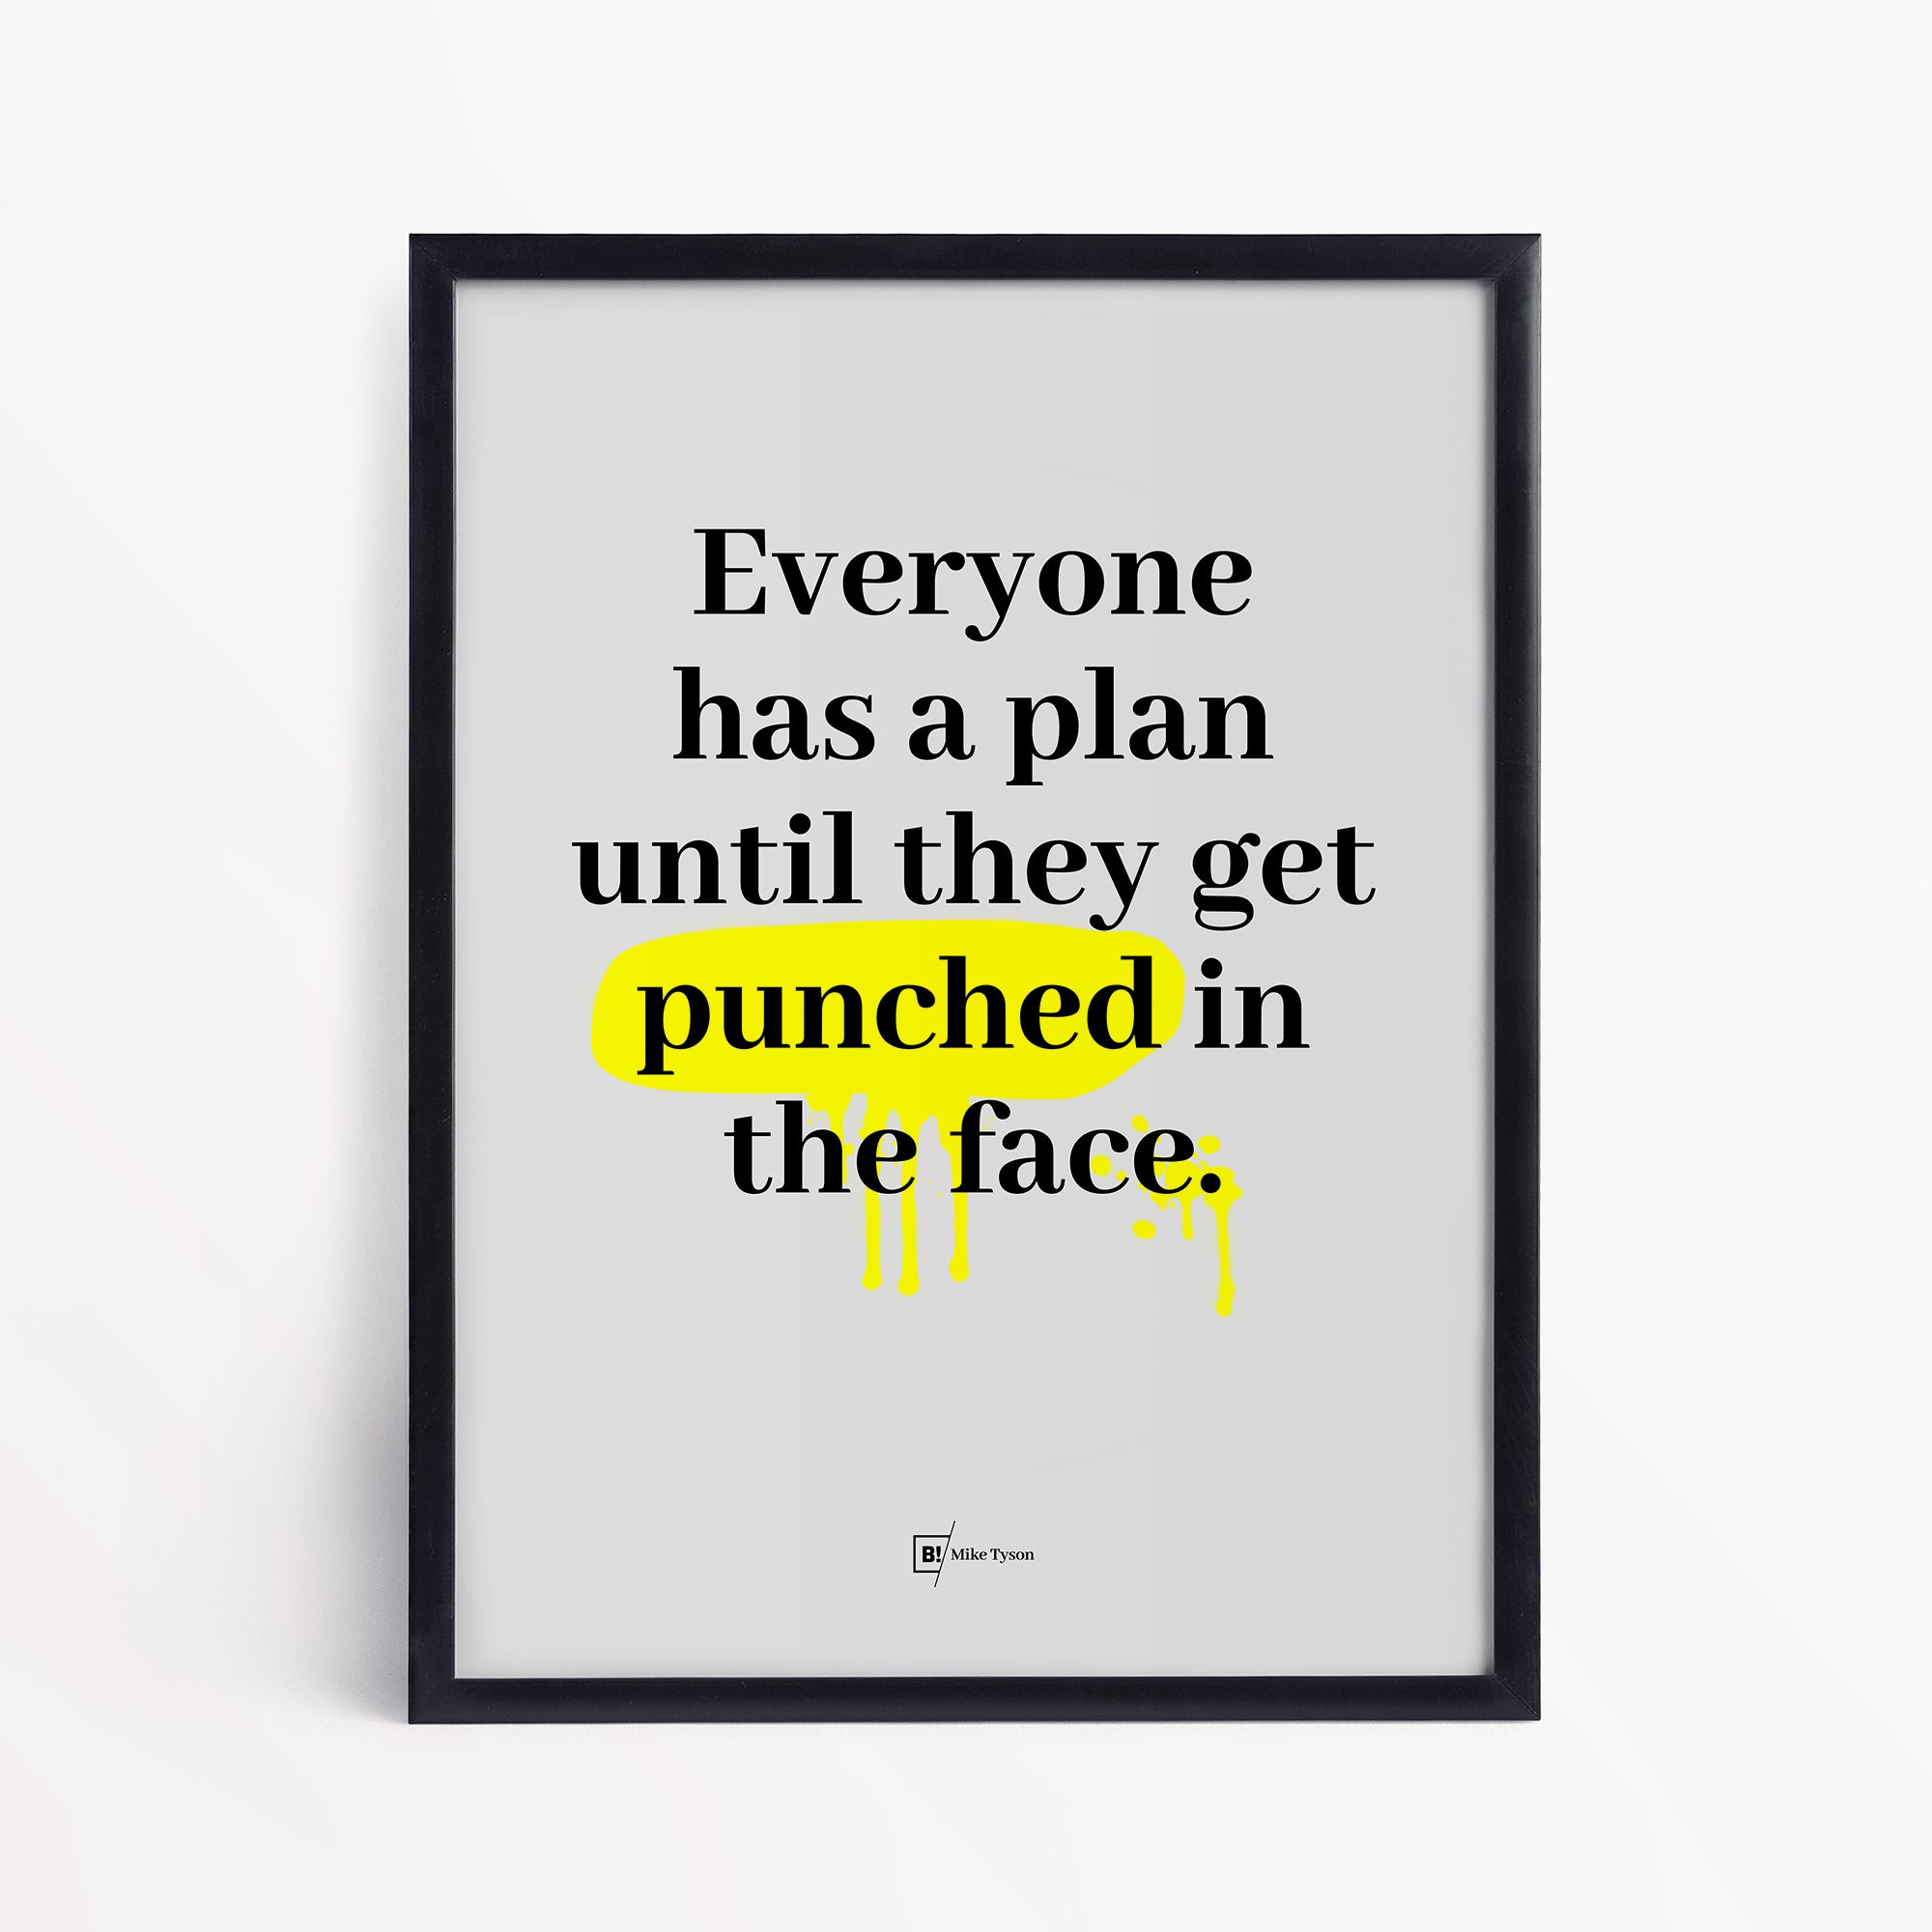 Be inspired by Mike Tyson's famous "Everyone has a plan until they get punched in the face" quote art print. This artwork was printed using the giclée process on archival acid-free paper and is presented in a simple black frame that captures its timeless beauty in every detail.